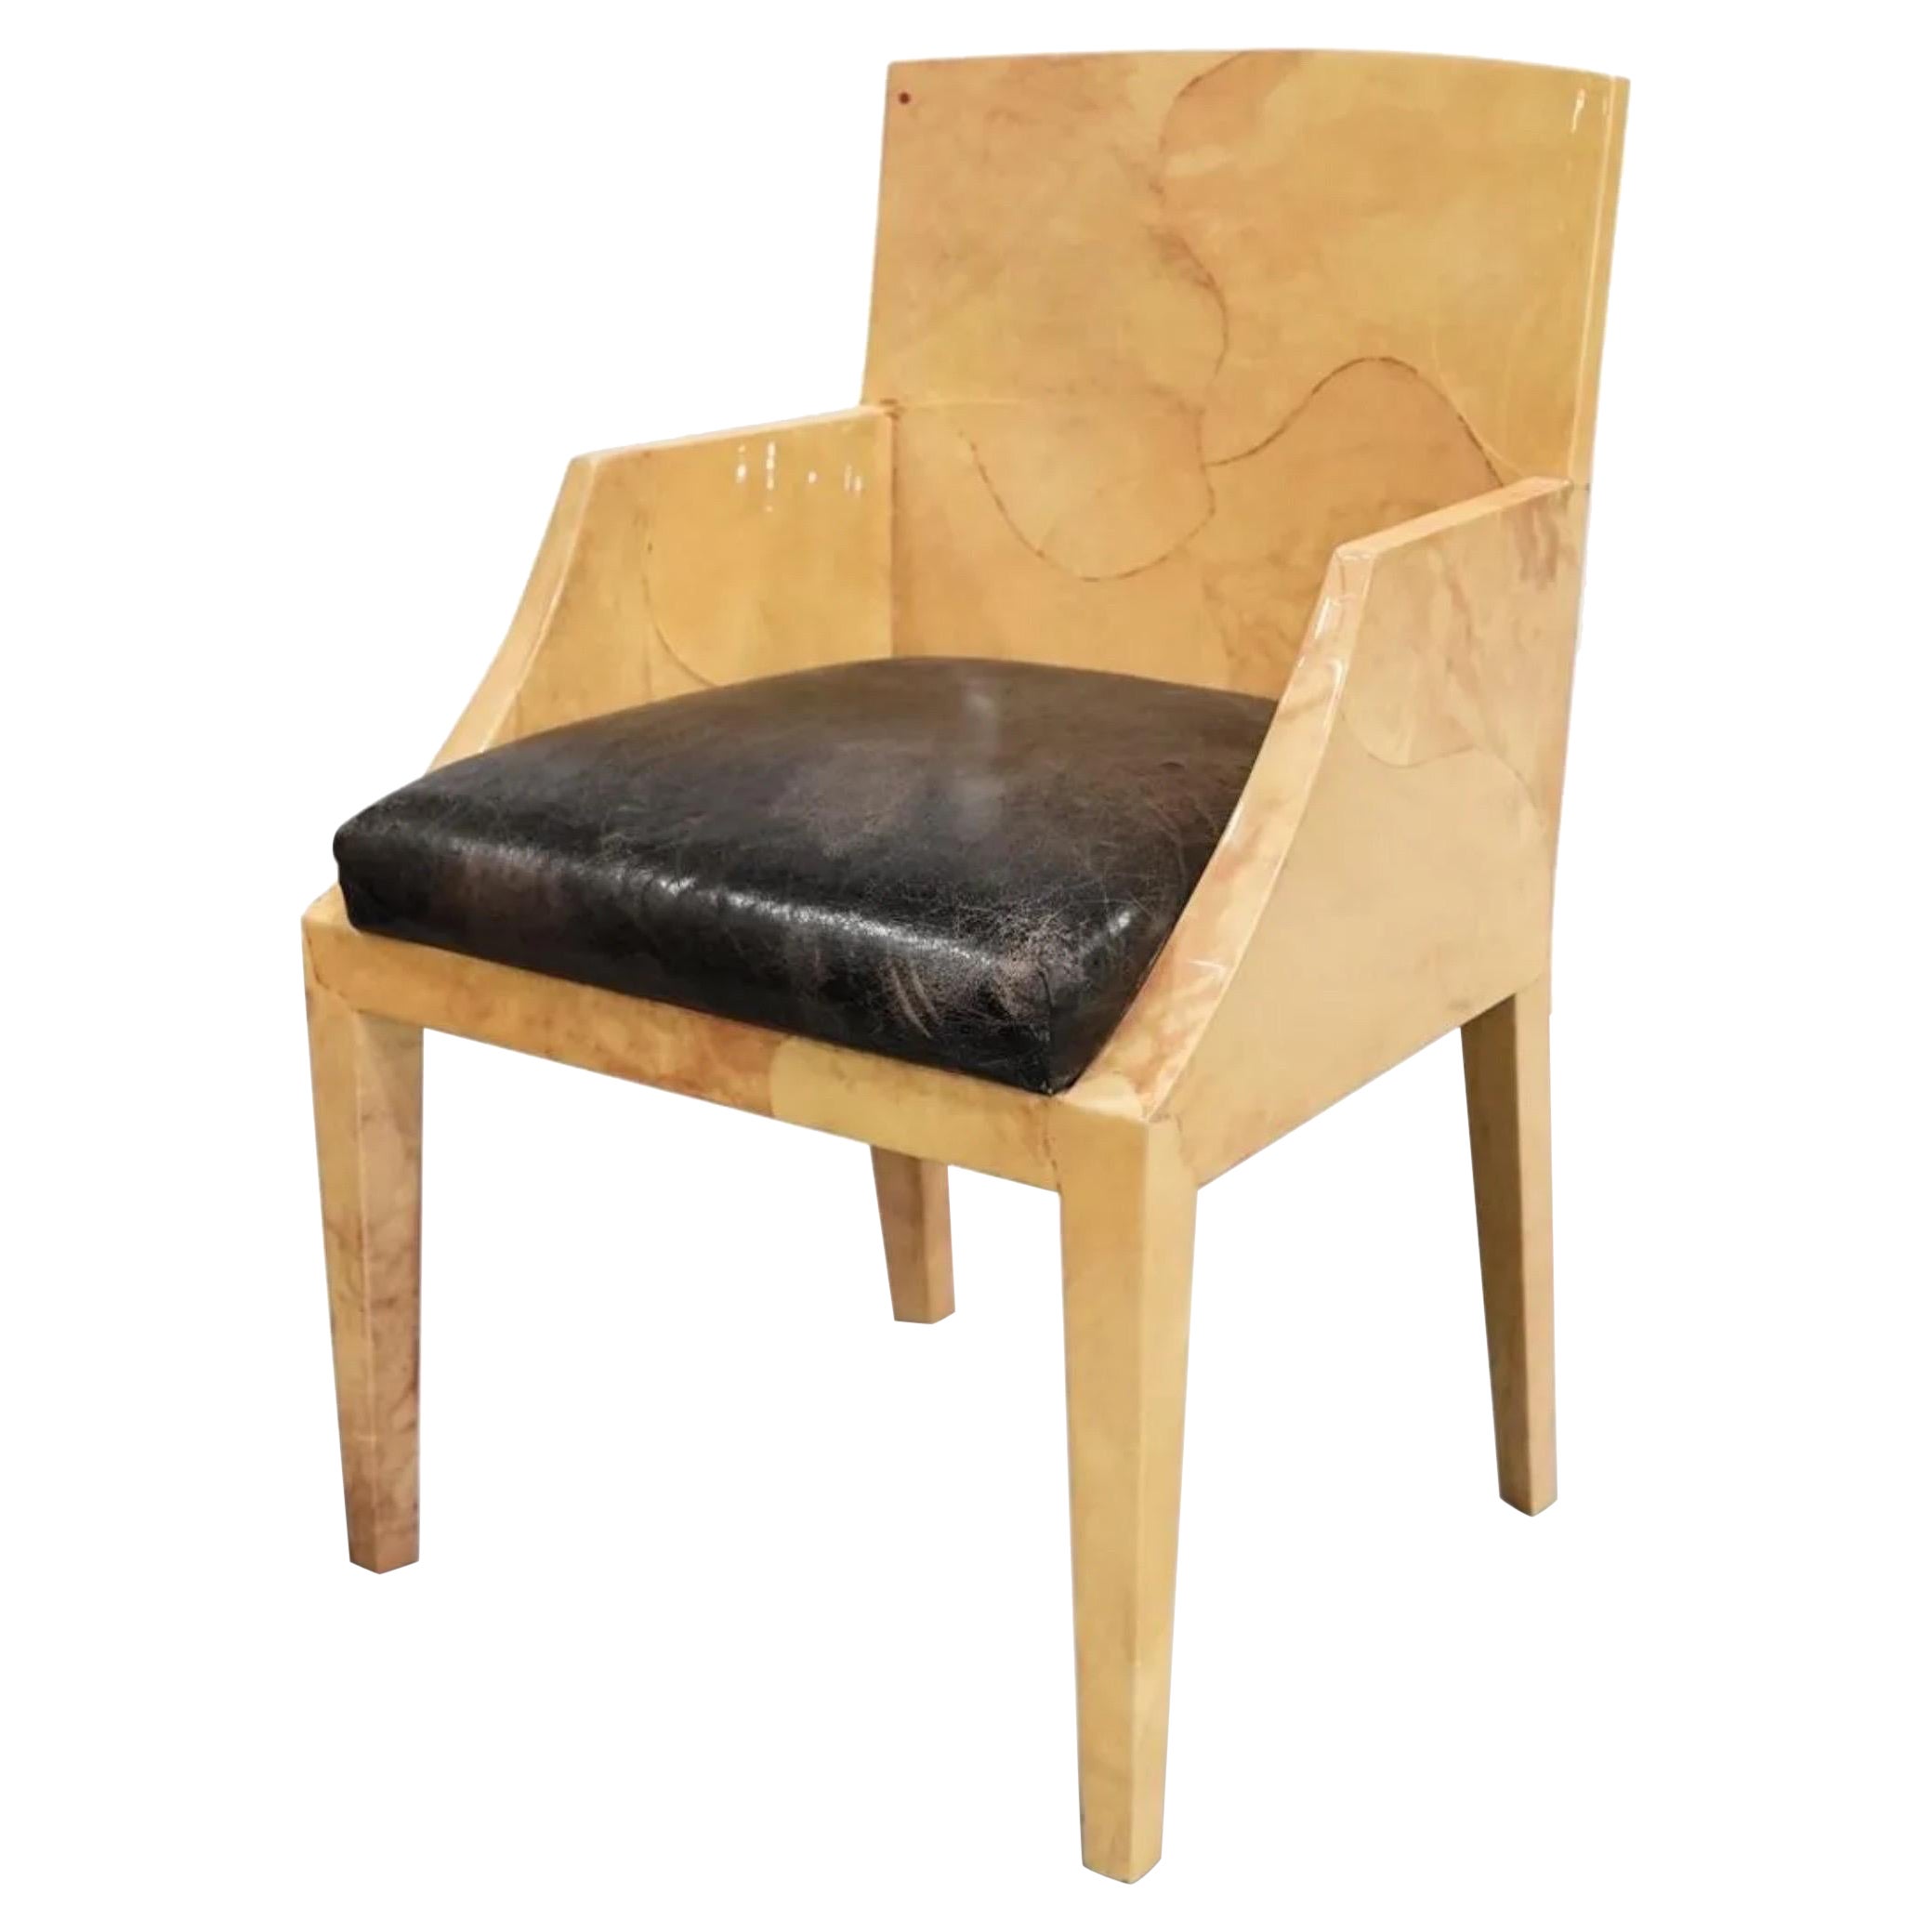 Ron Seff Goatskin Lacquered Armchair For Sale